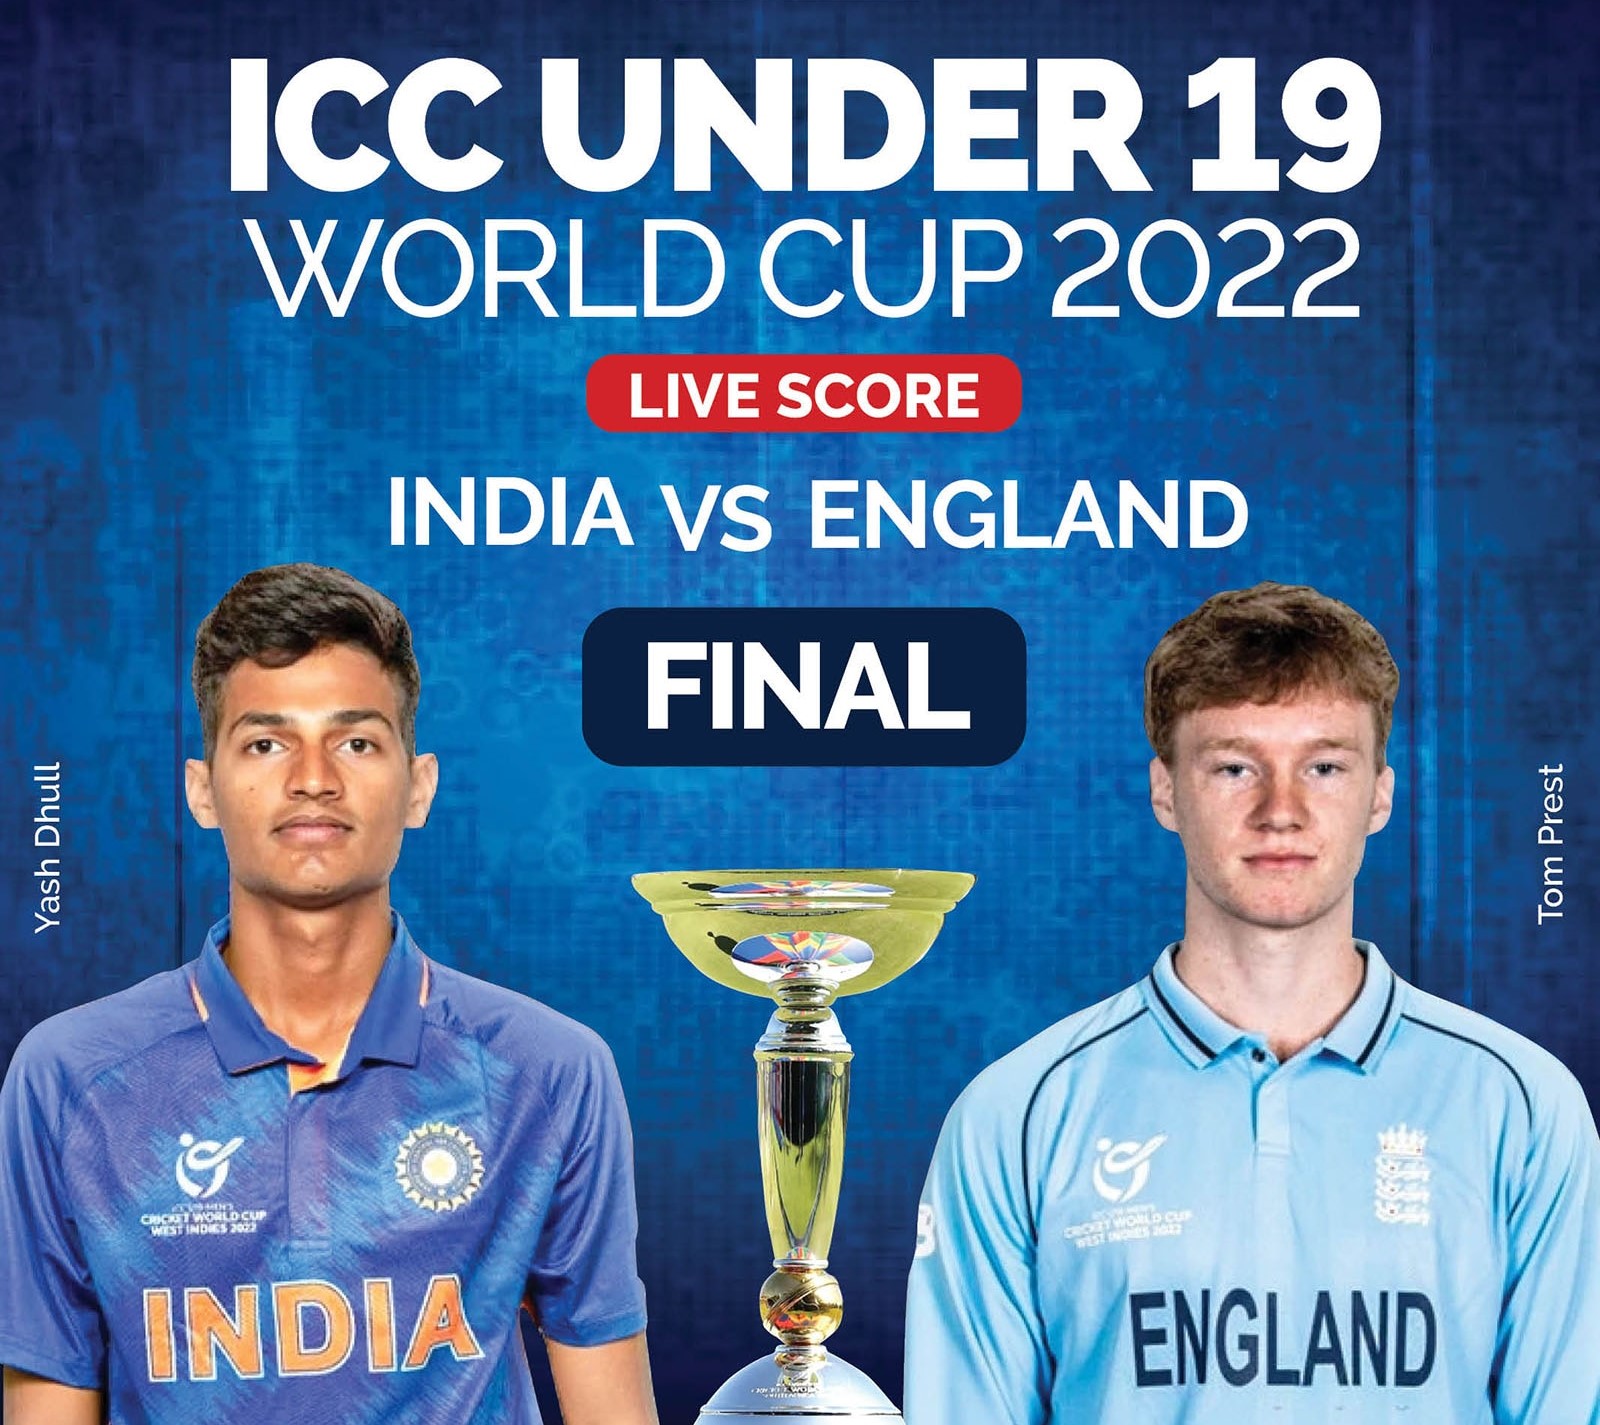 India beat England by 4 wickets and won the Fifth Title of U19 World Cup 2022